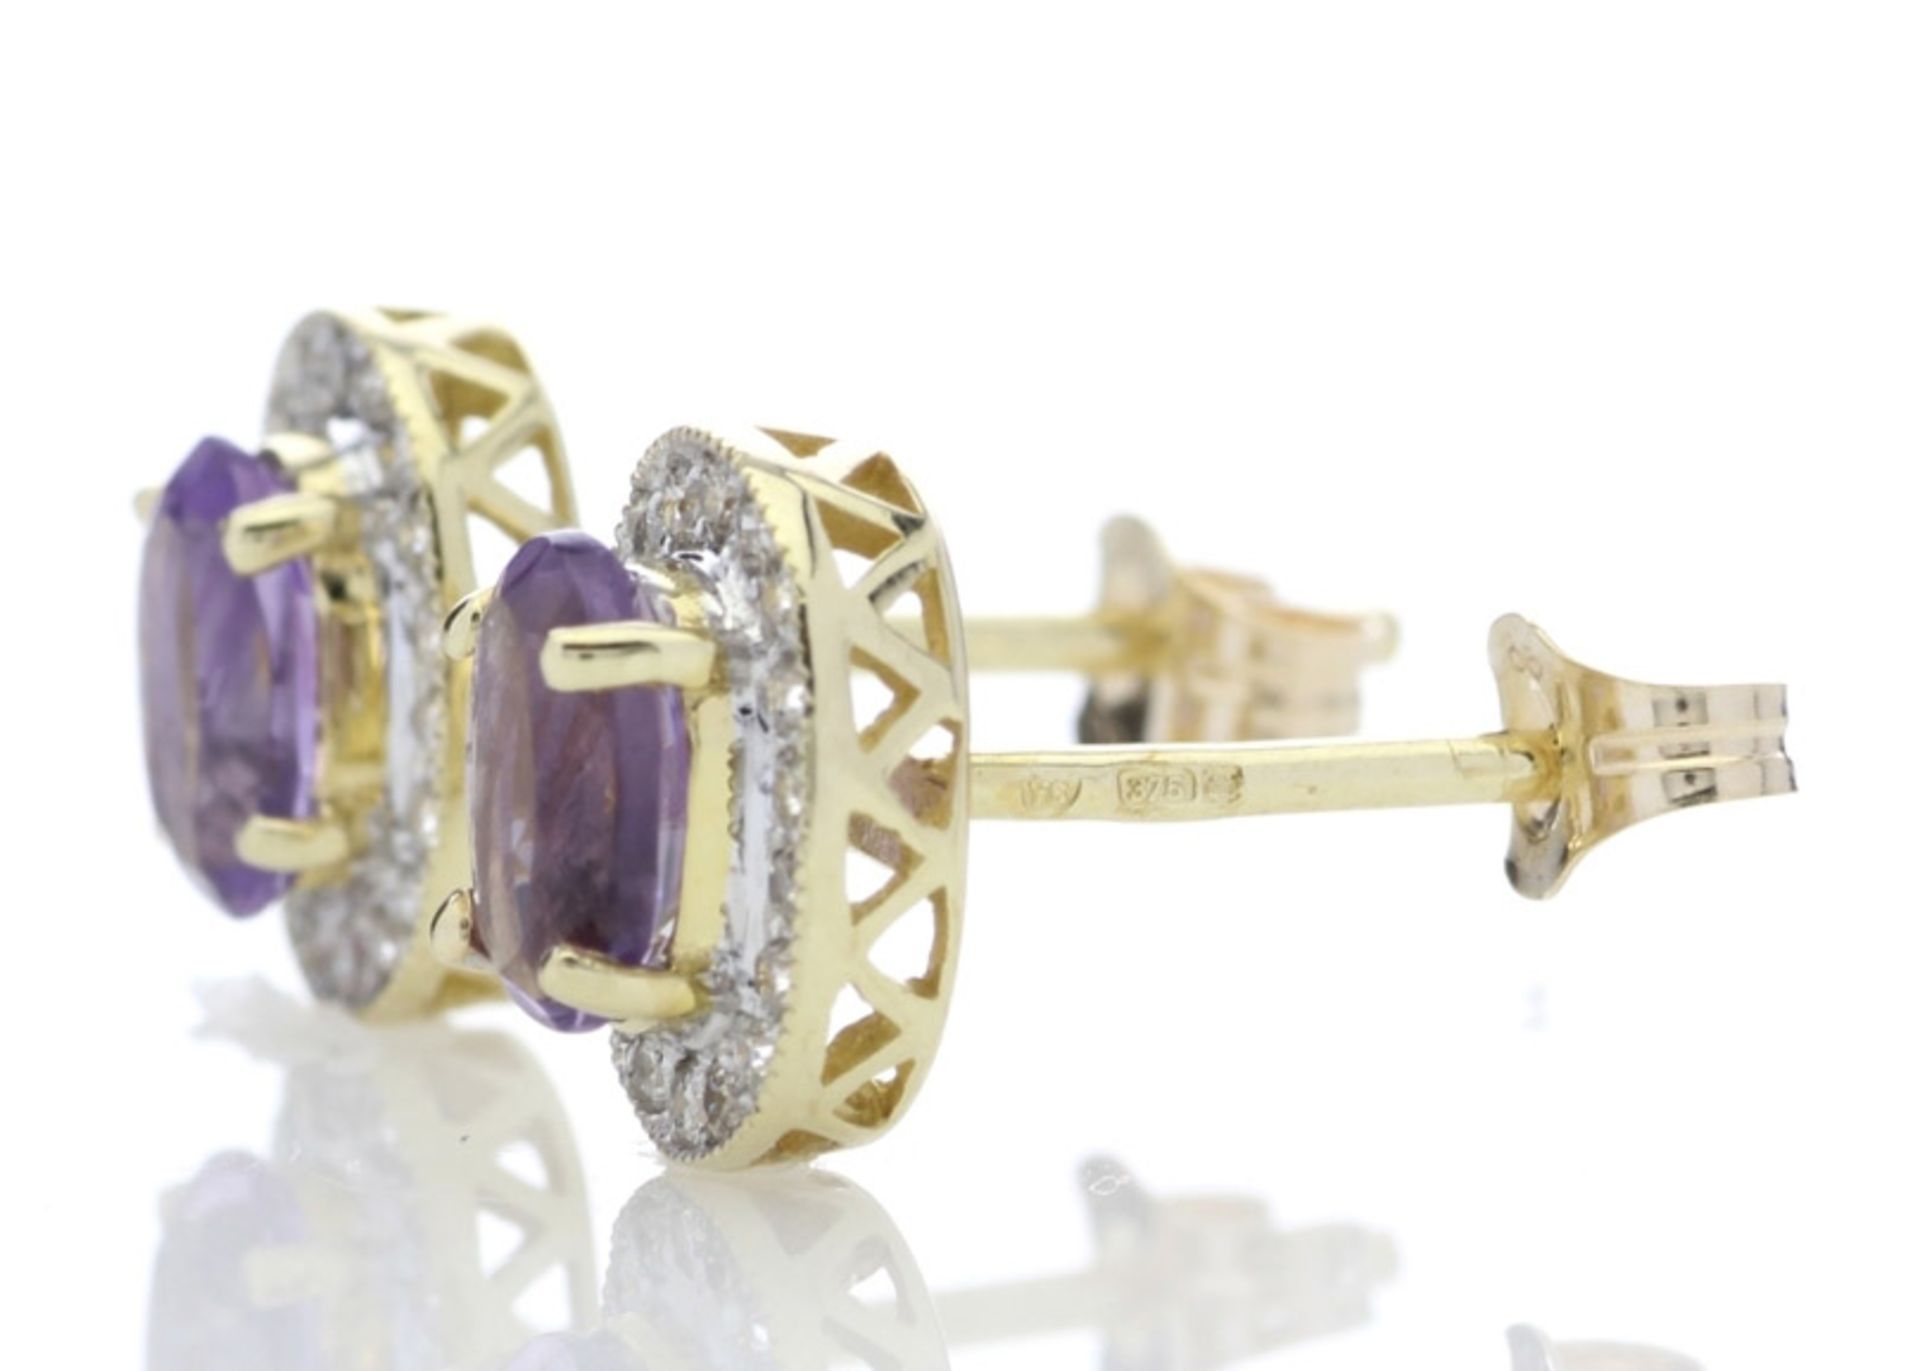 9ct Yellow Gold Amethyst and Diamond Cluster Earring (A0.86) 0.18 Carats - Valued By GIE £2,855.00 - - Image 2 of 7